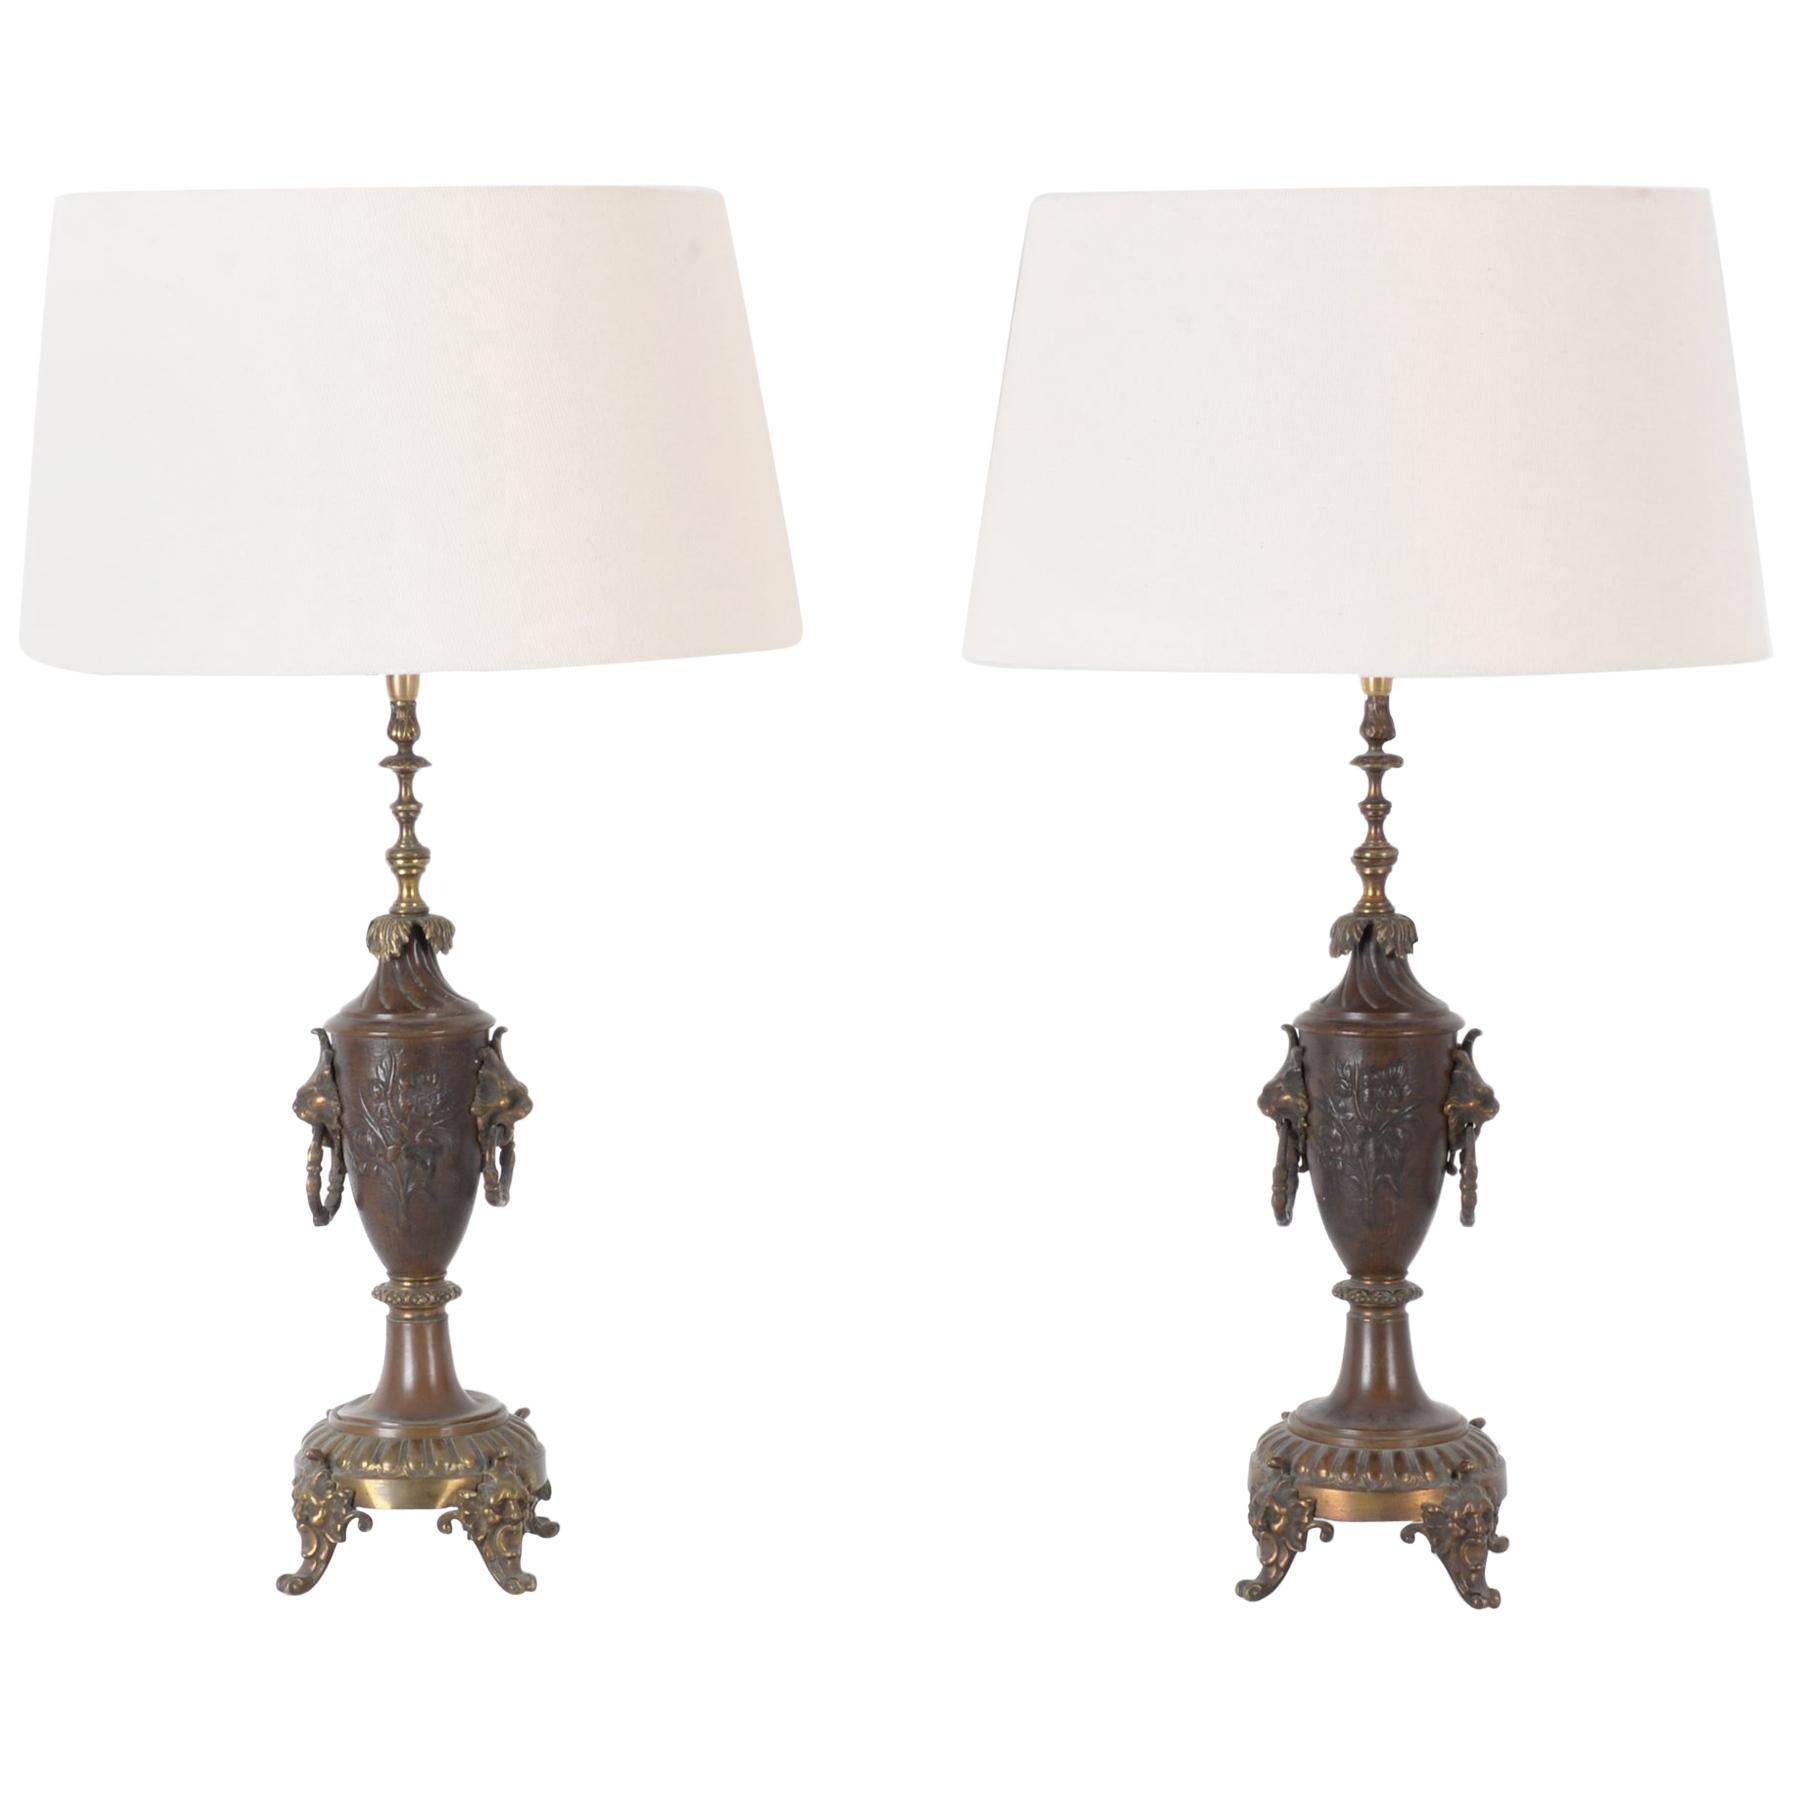 Turn of the Century French Brass Table Lamps, a Pair